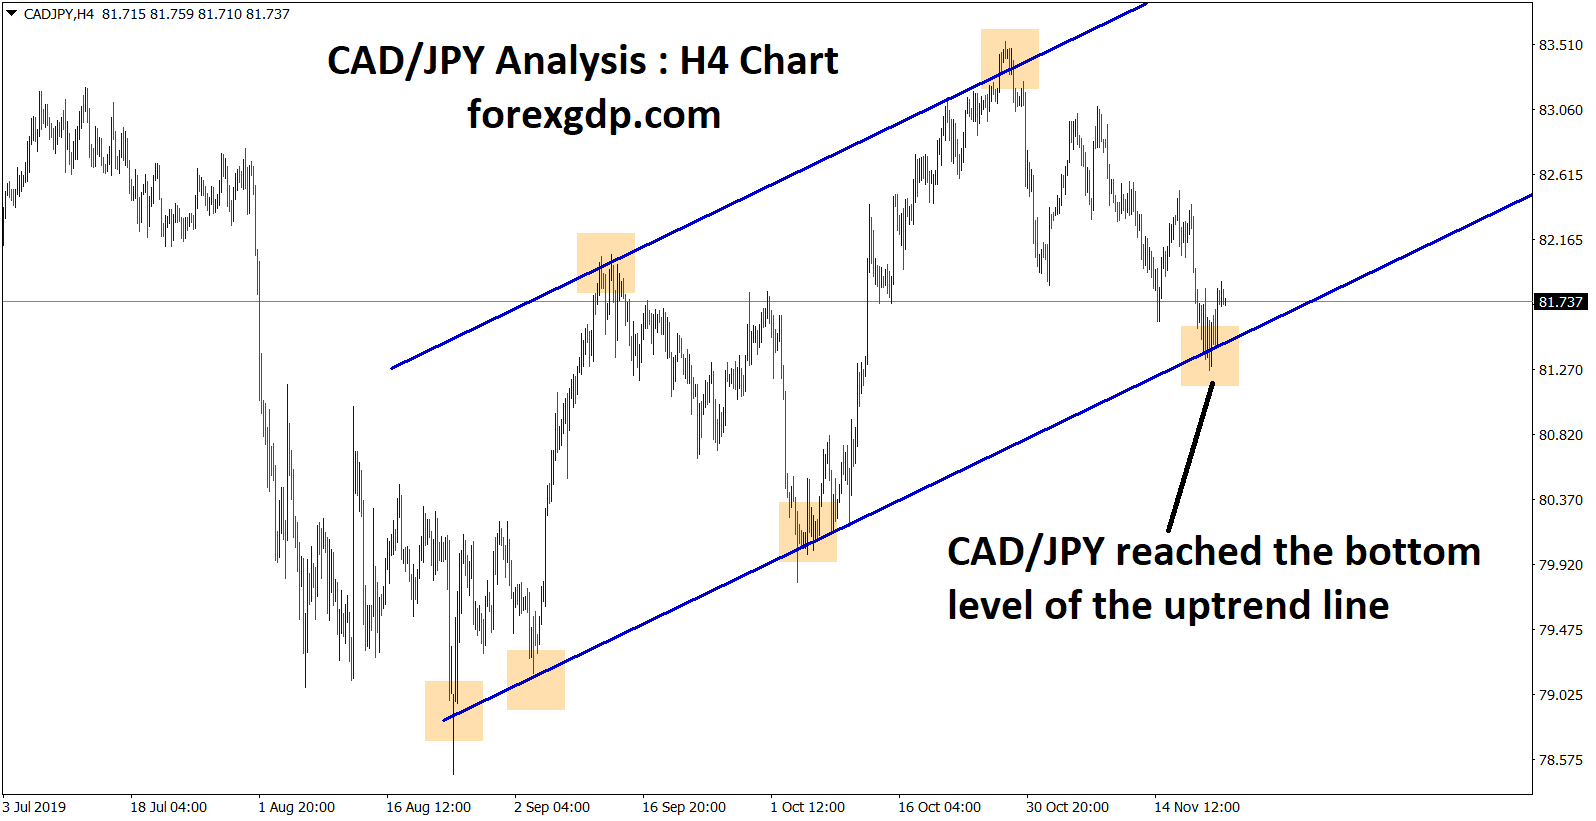 cad jpy reached the bottom level of the uptrend in H4 chart